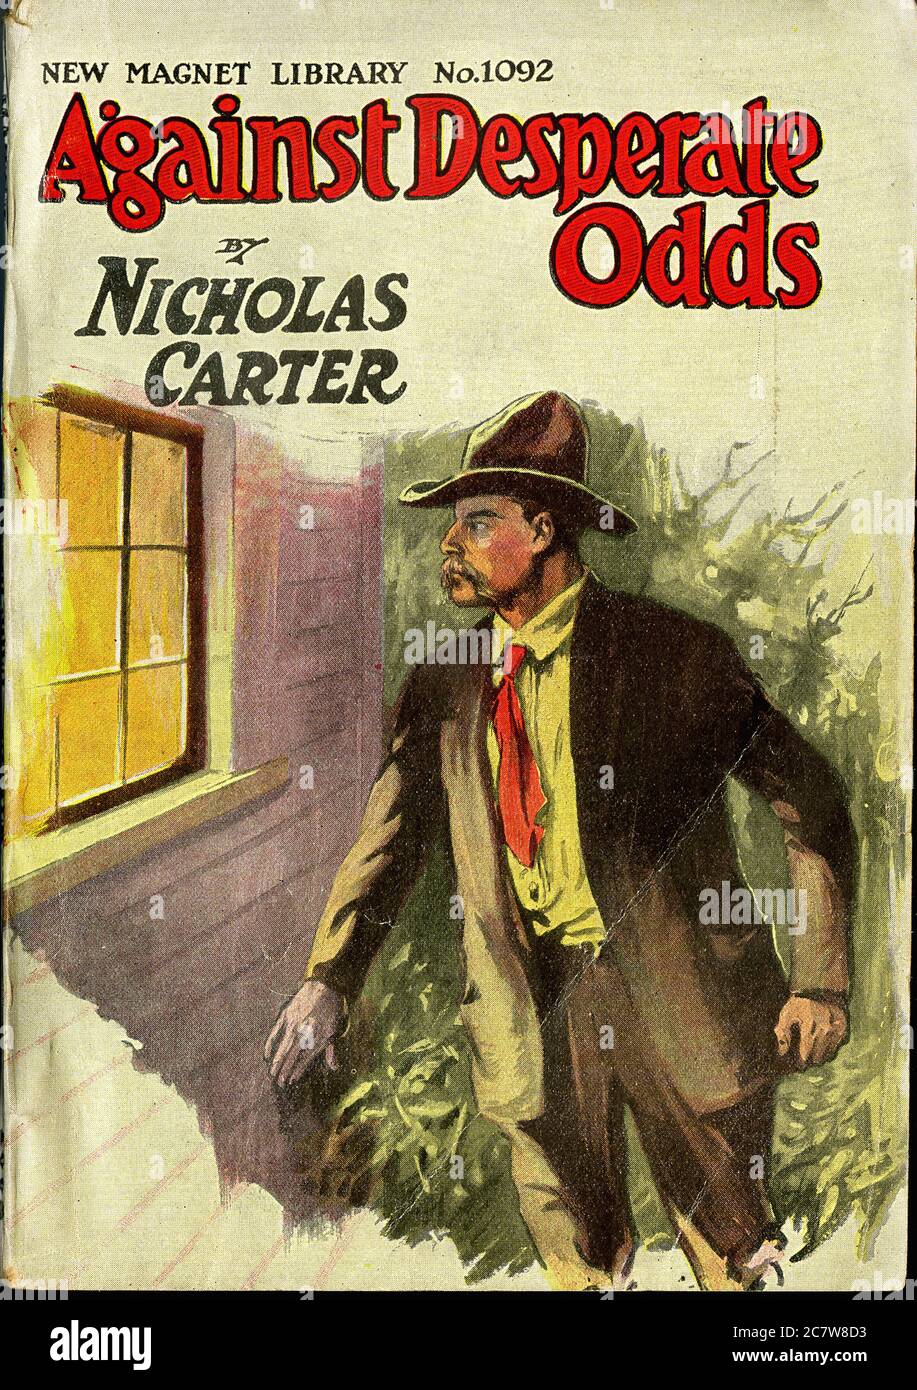 Nicholas Carter - Against Desperate Odds - New Magnet Library - Vintage Pulp Literary Stock Photo